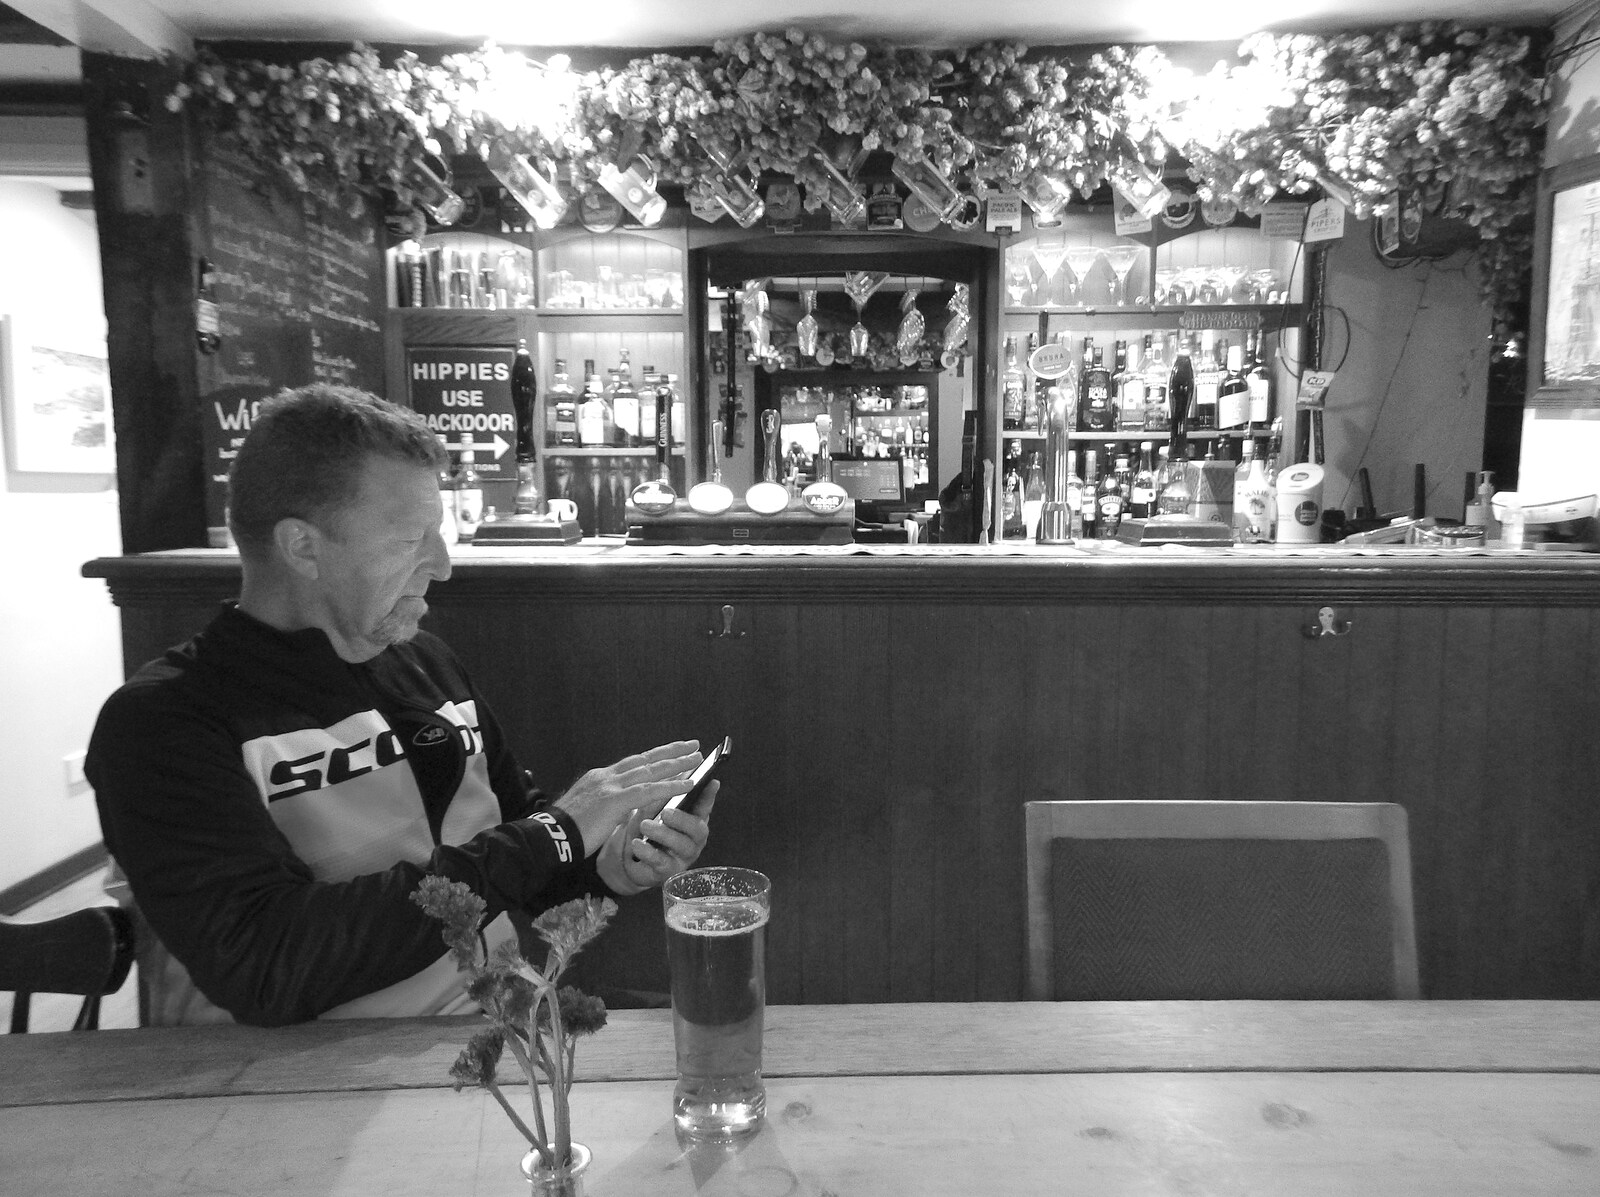 Gaz checks his phone in the Burston Crown from The BSCC at Burston and The Legend of Swallow Aquatics, East Harling, Norfolk - 15th May 2022